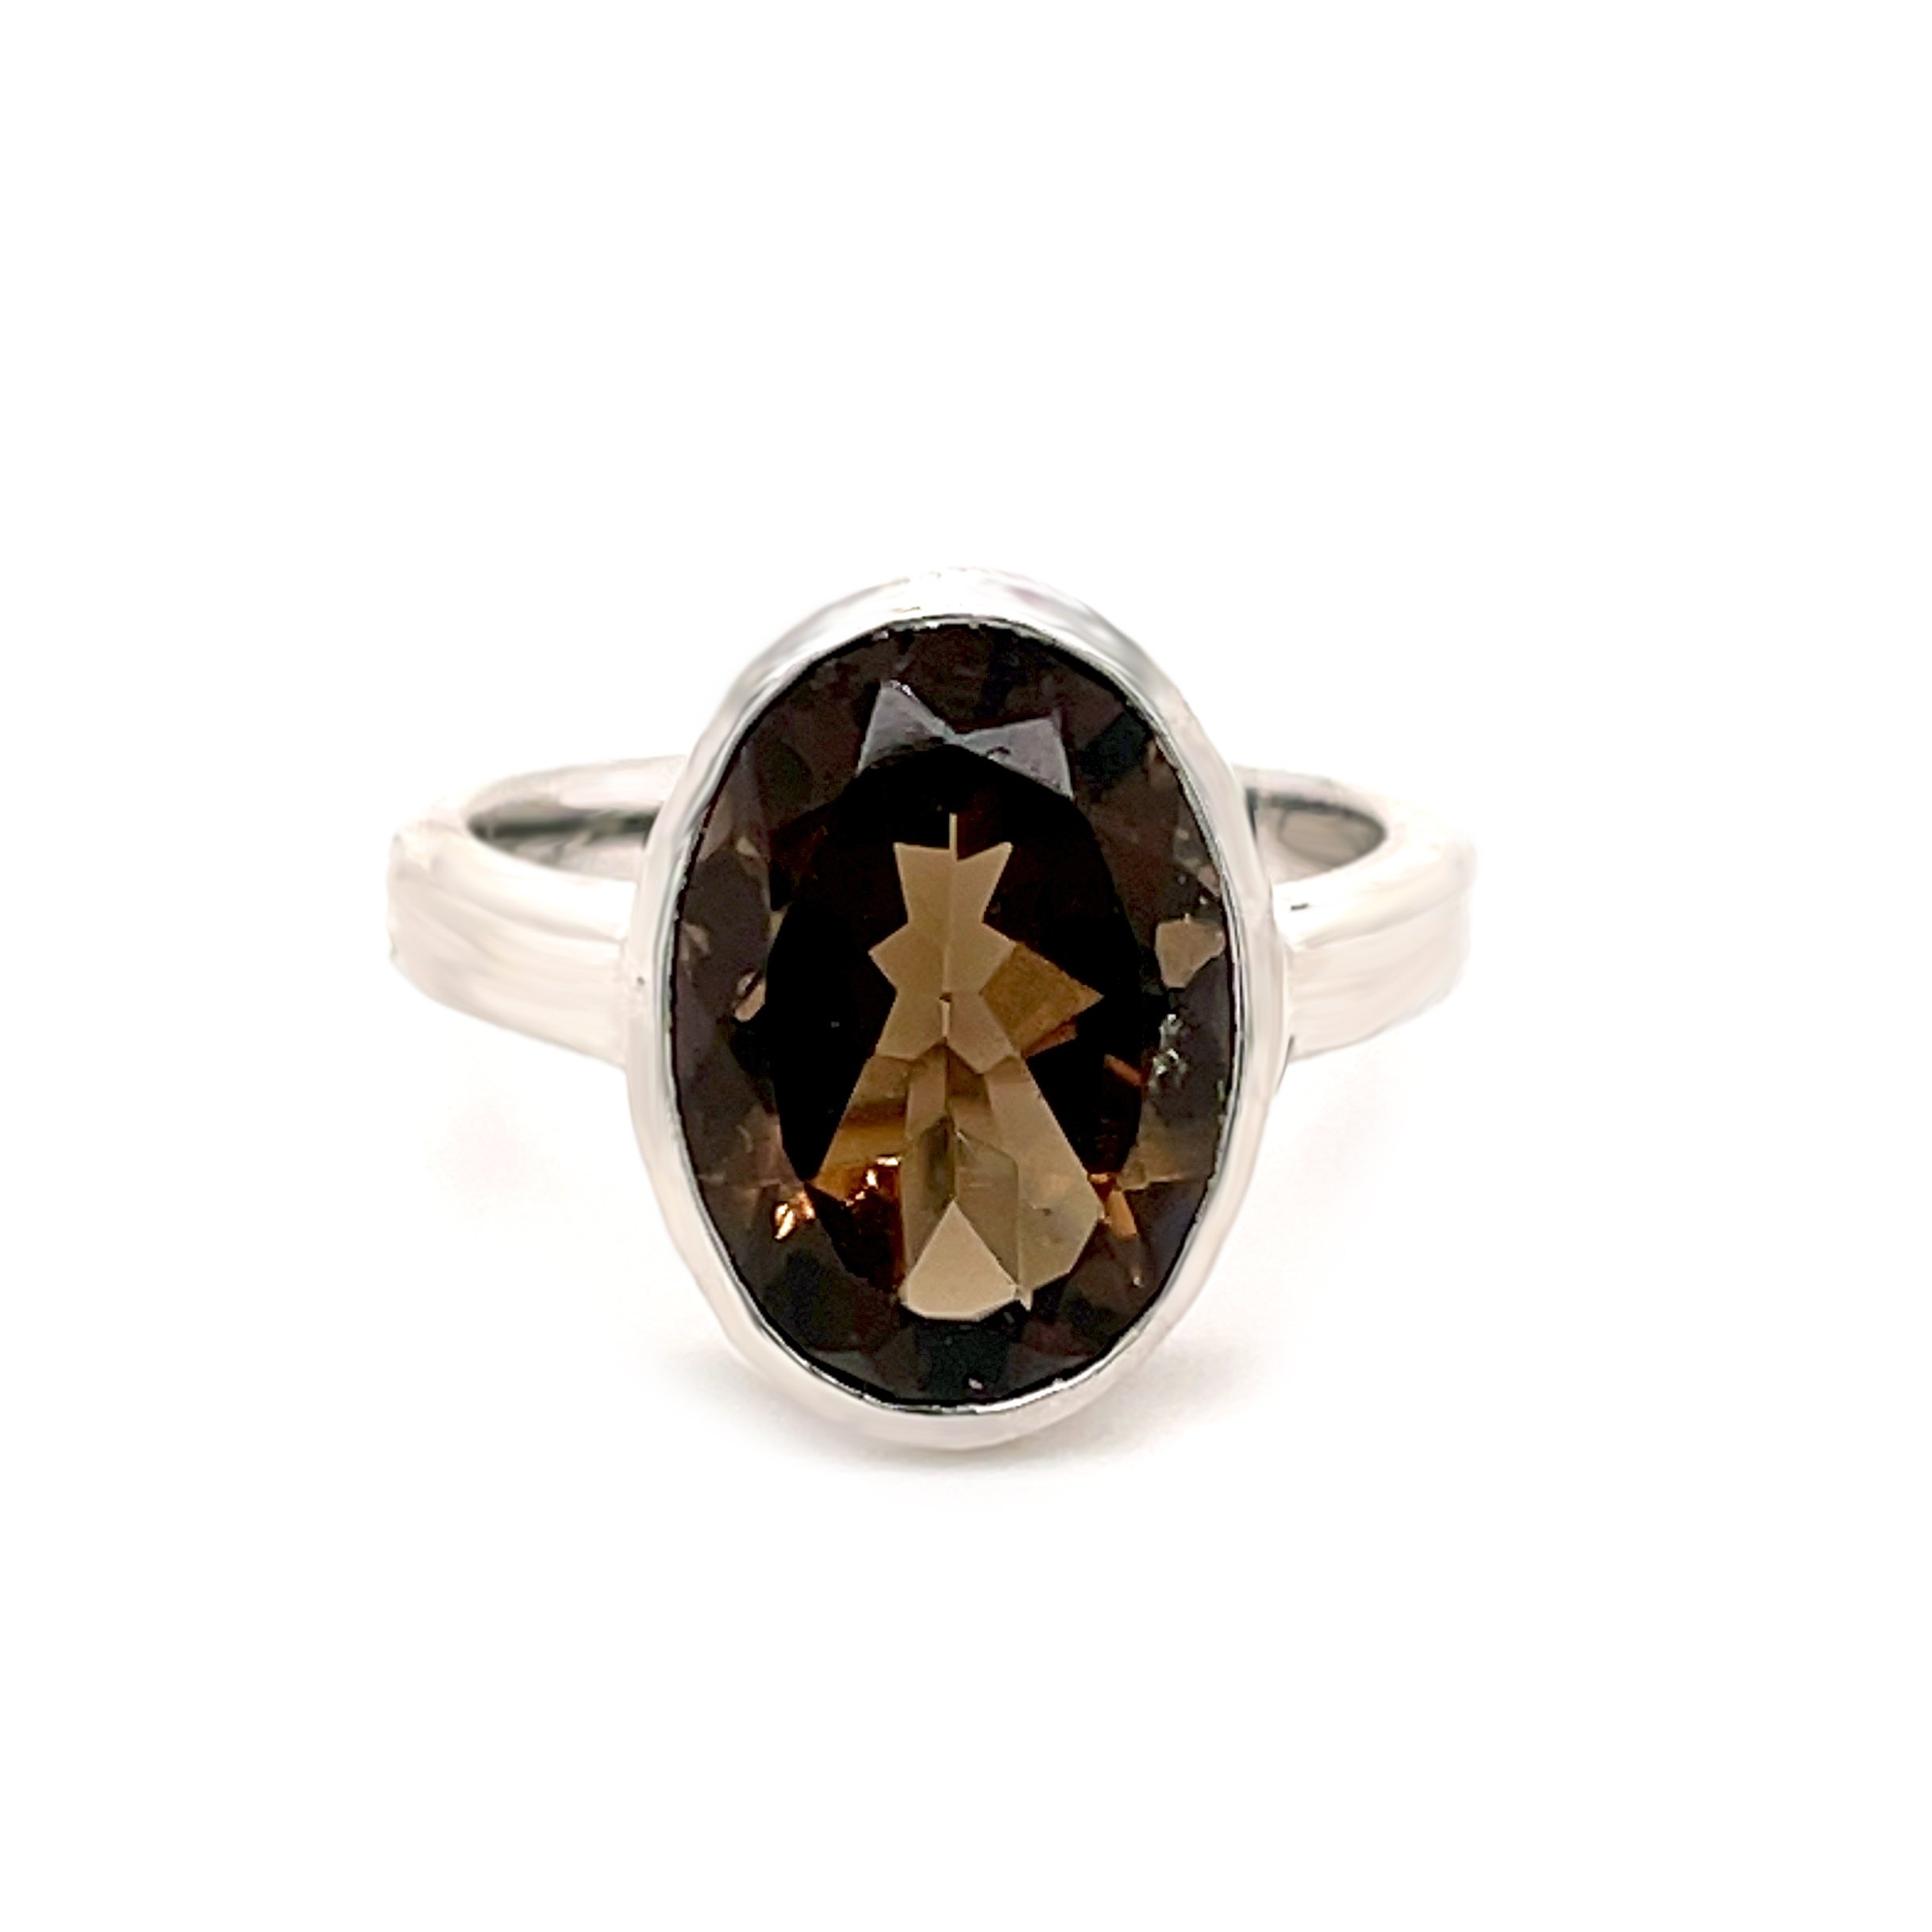 Smoky Quartz Ring Size 7 - Faceted Oval With Raised Silver Cutout Bezel & Tapered Band